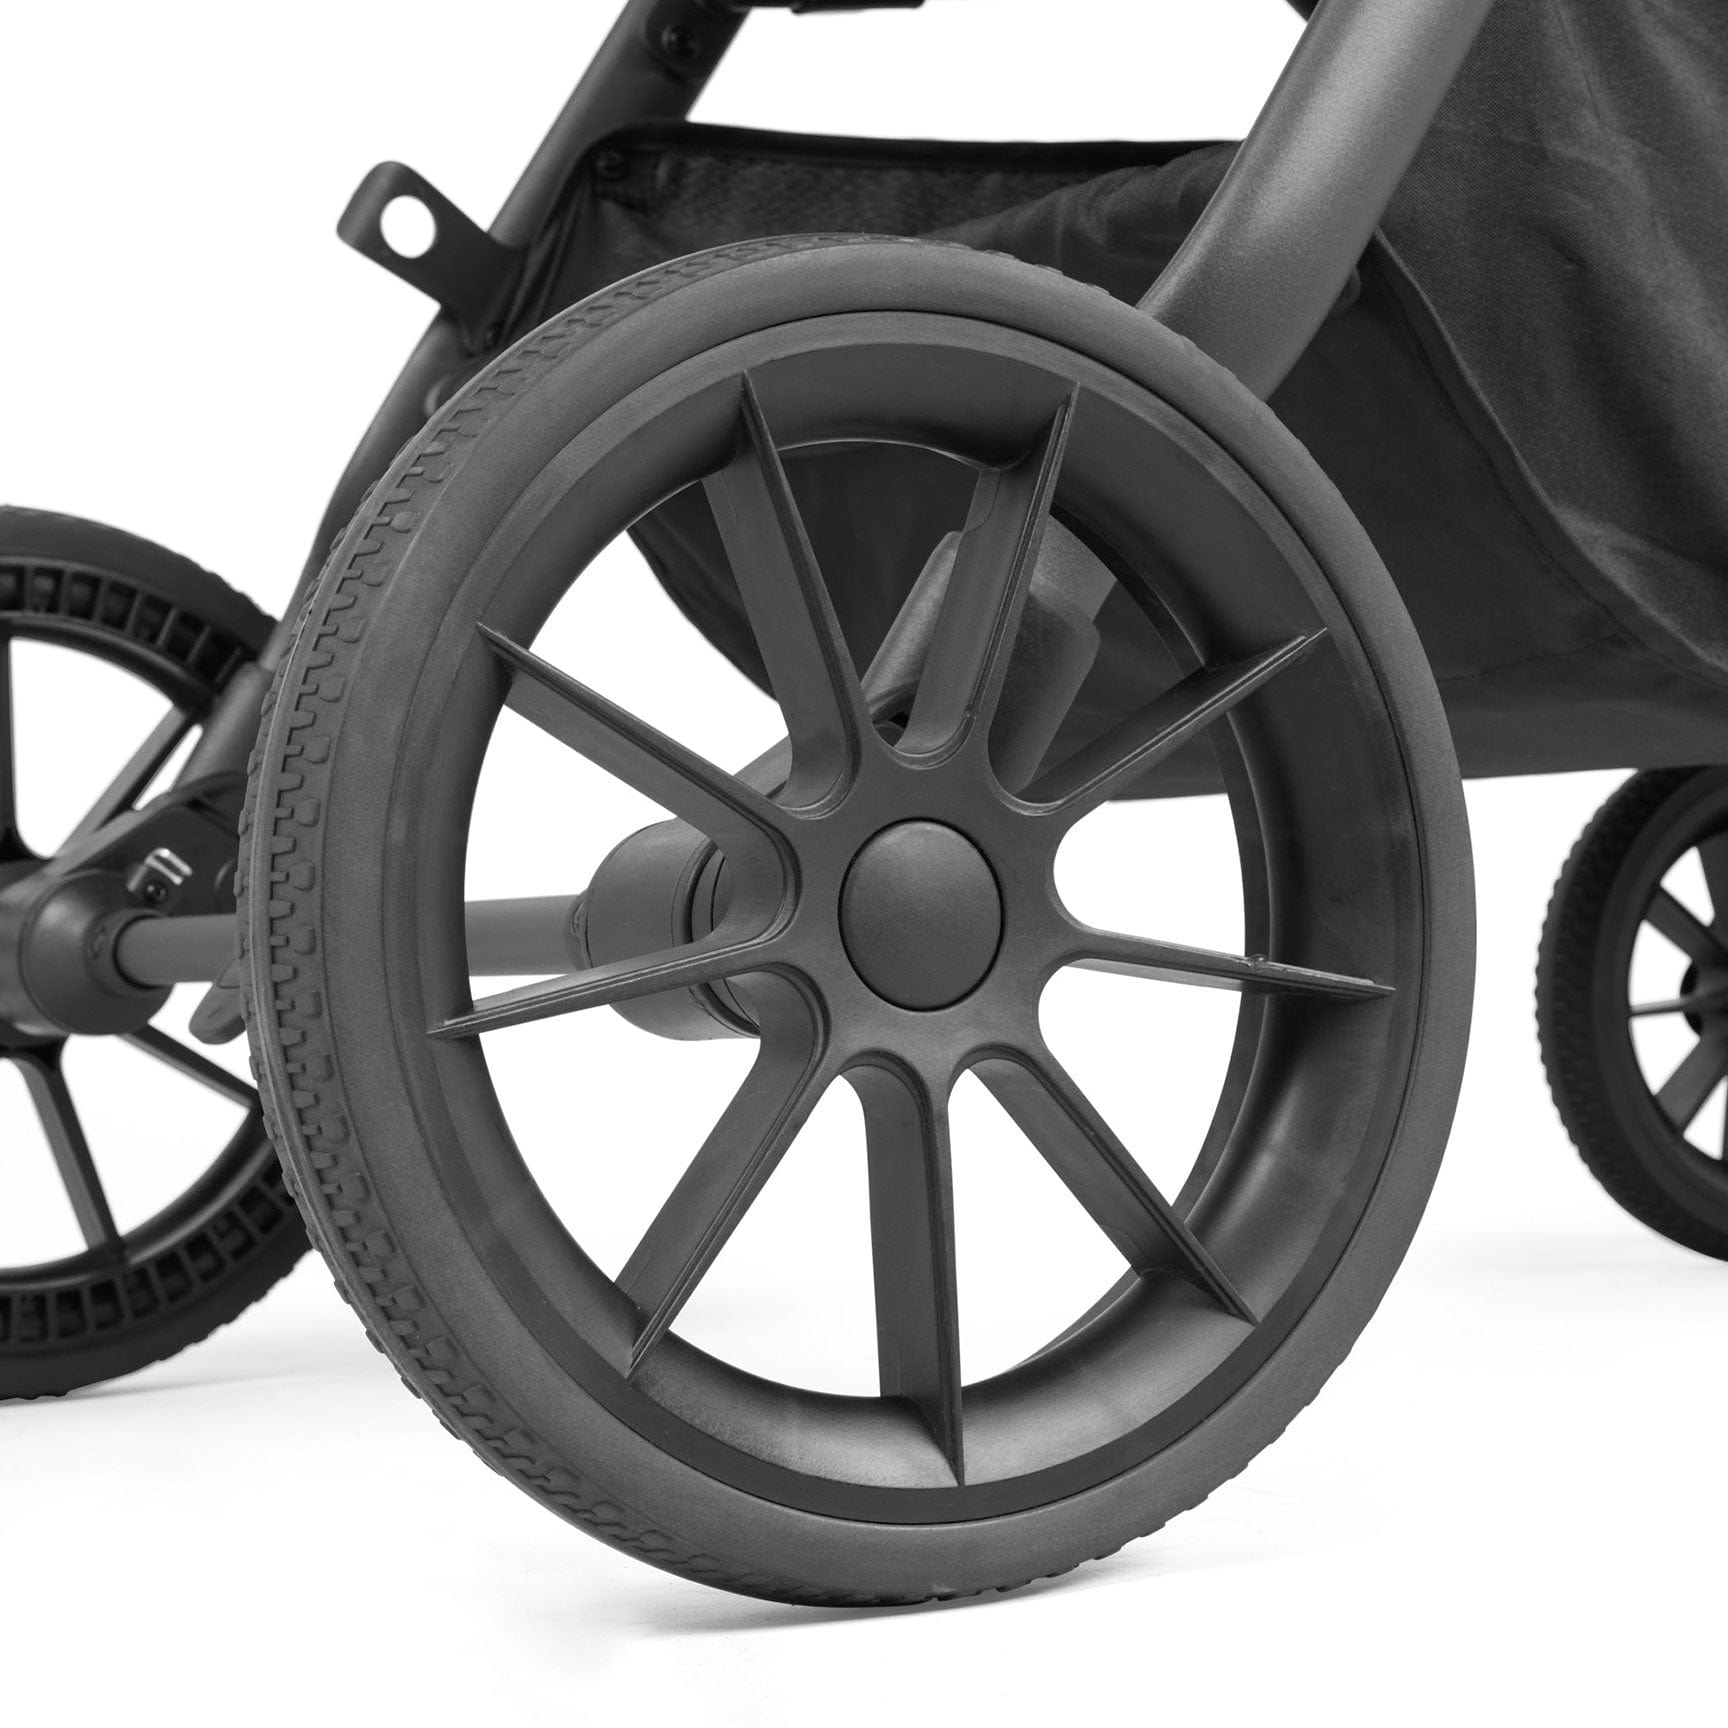 Ickle Bubba travel systems Ickle Bubba Cosmo 2 in 1 Plus Carrycot & Pushchair - Gun metal/Black 10-007-001-135